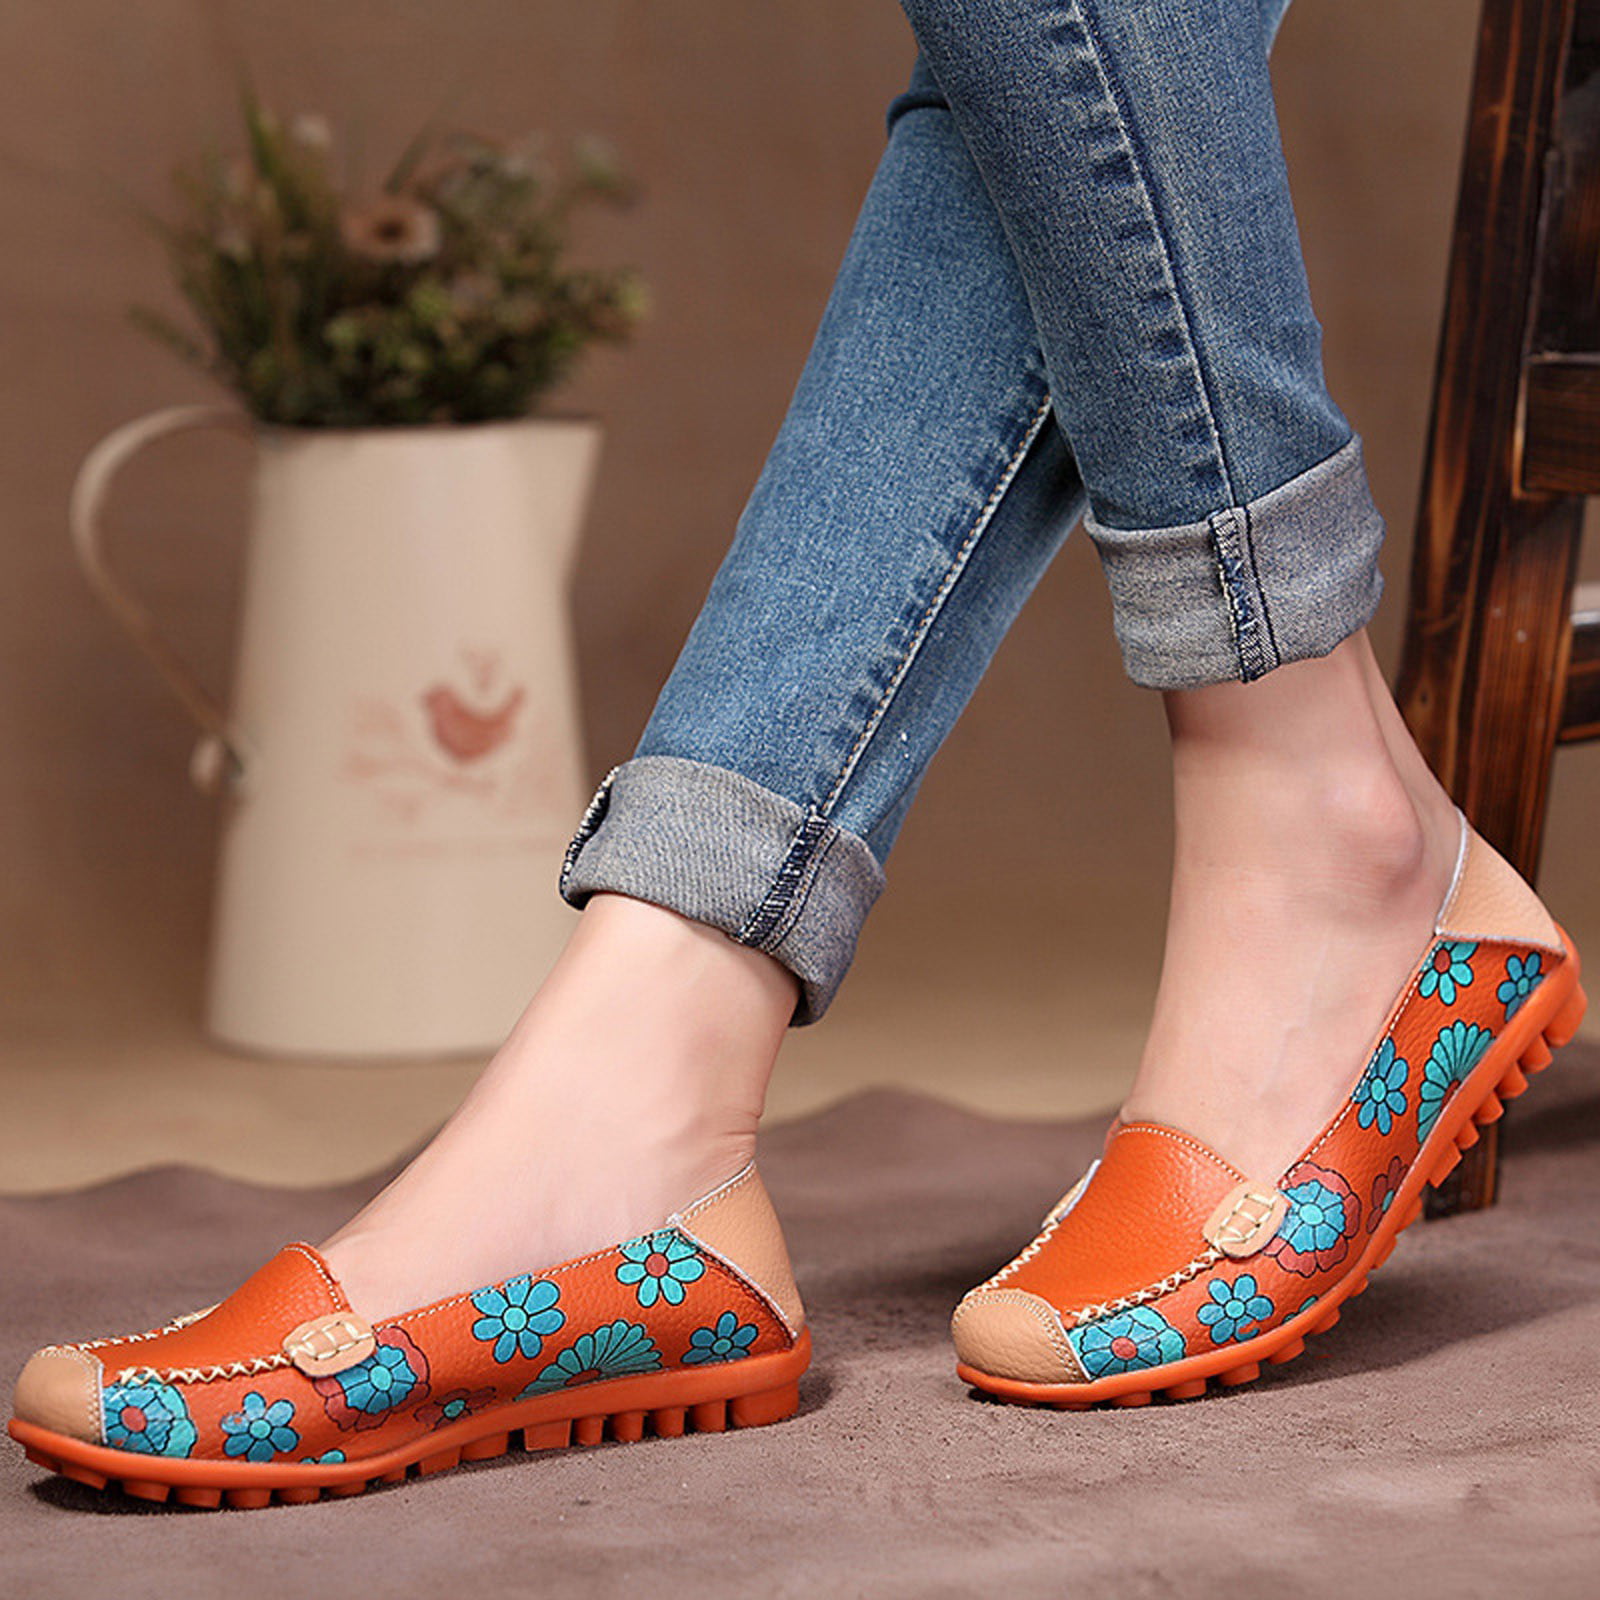 Women Soft Leather Buckle Slip On Casual Peas Non-Slip Outdoor Nurse Flats Shoes 